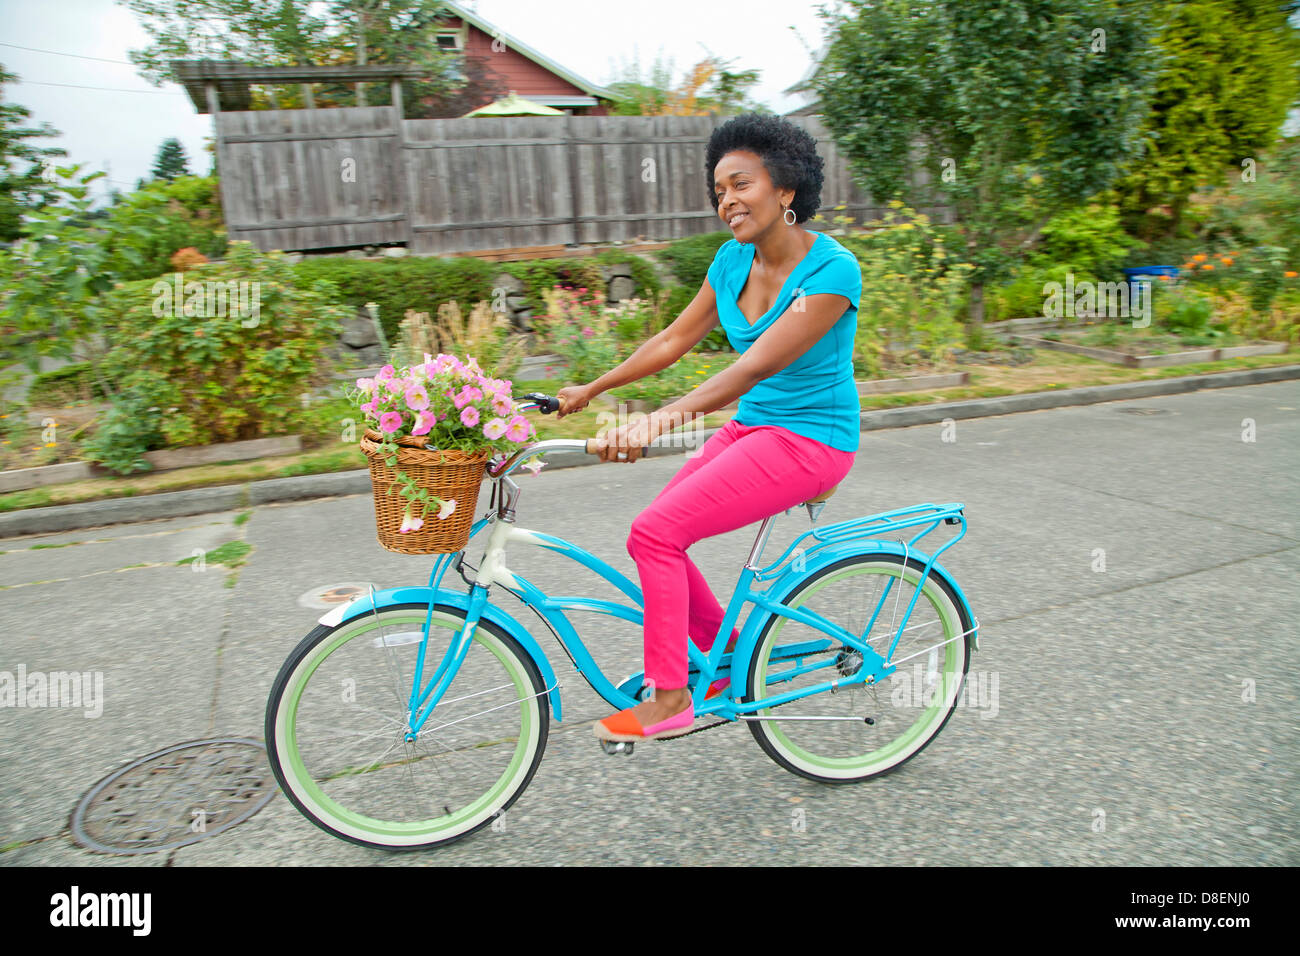 Woman riding retro bicycle with flower basket Stock Photo